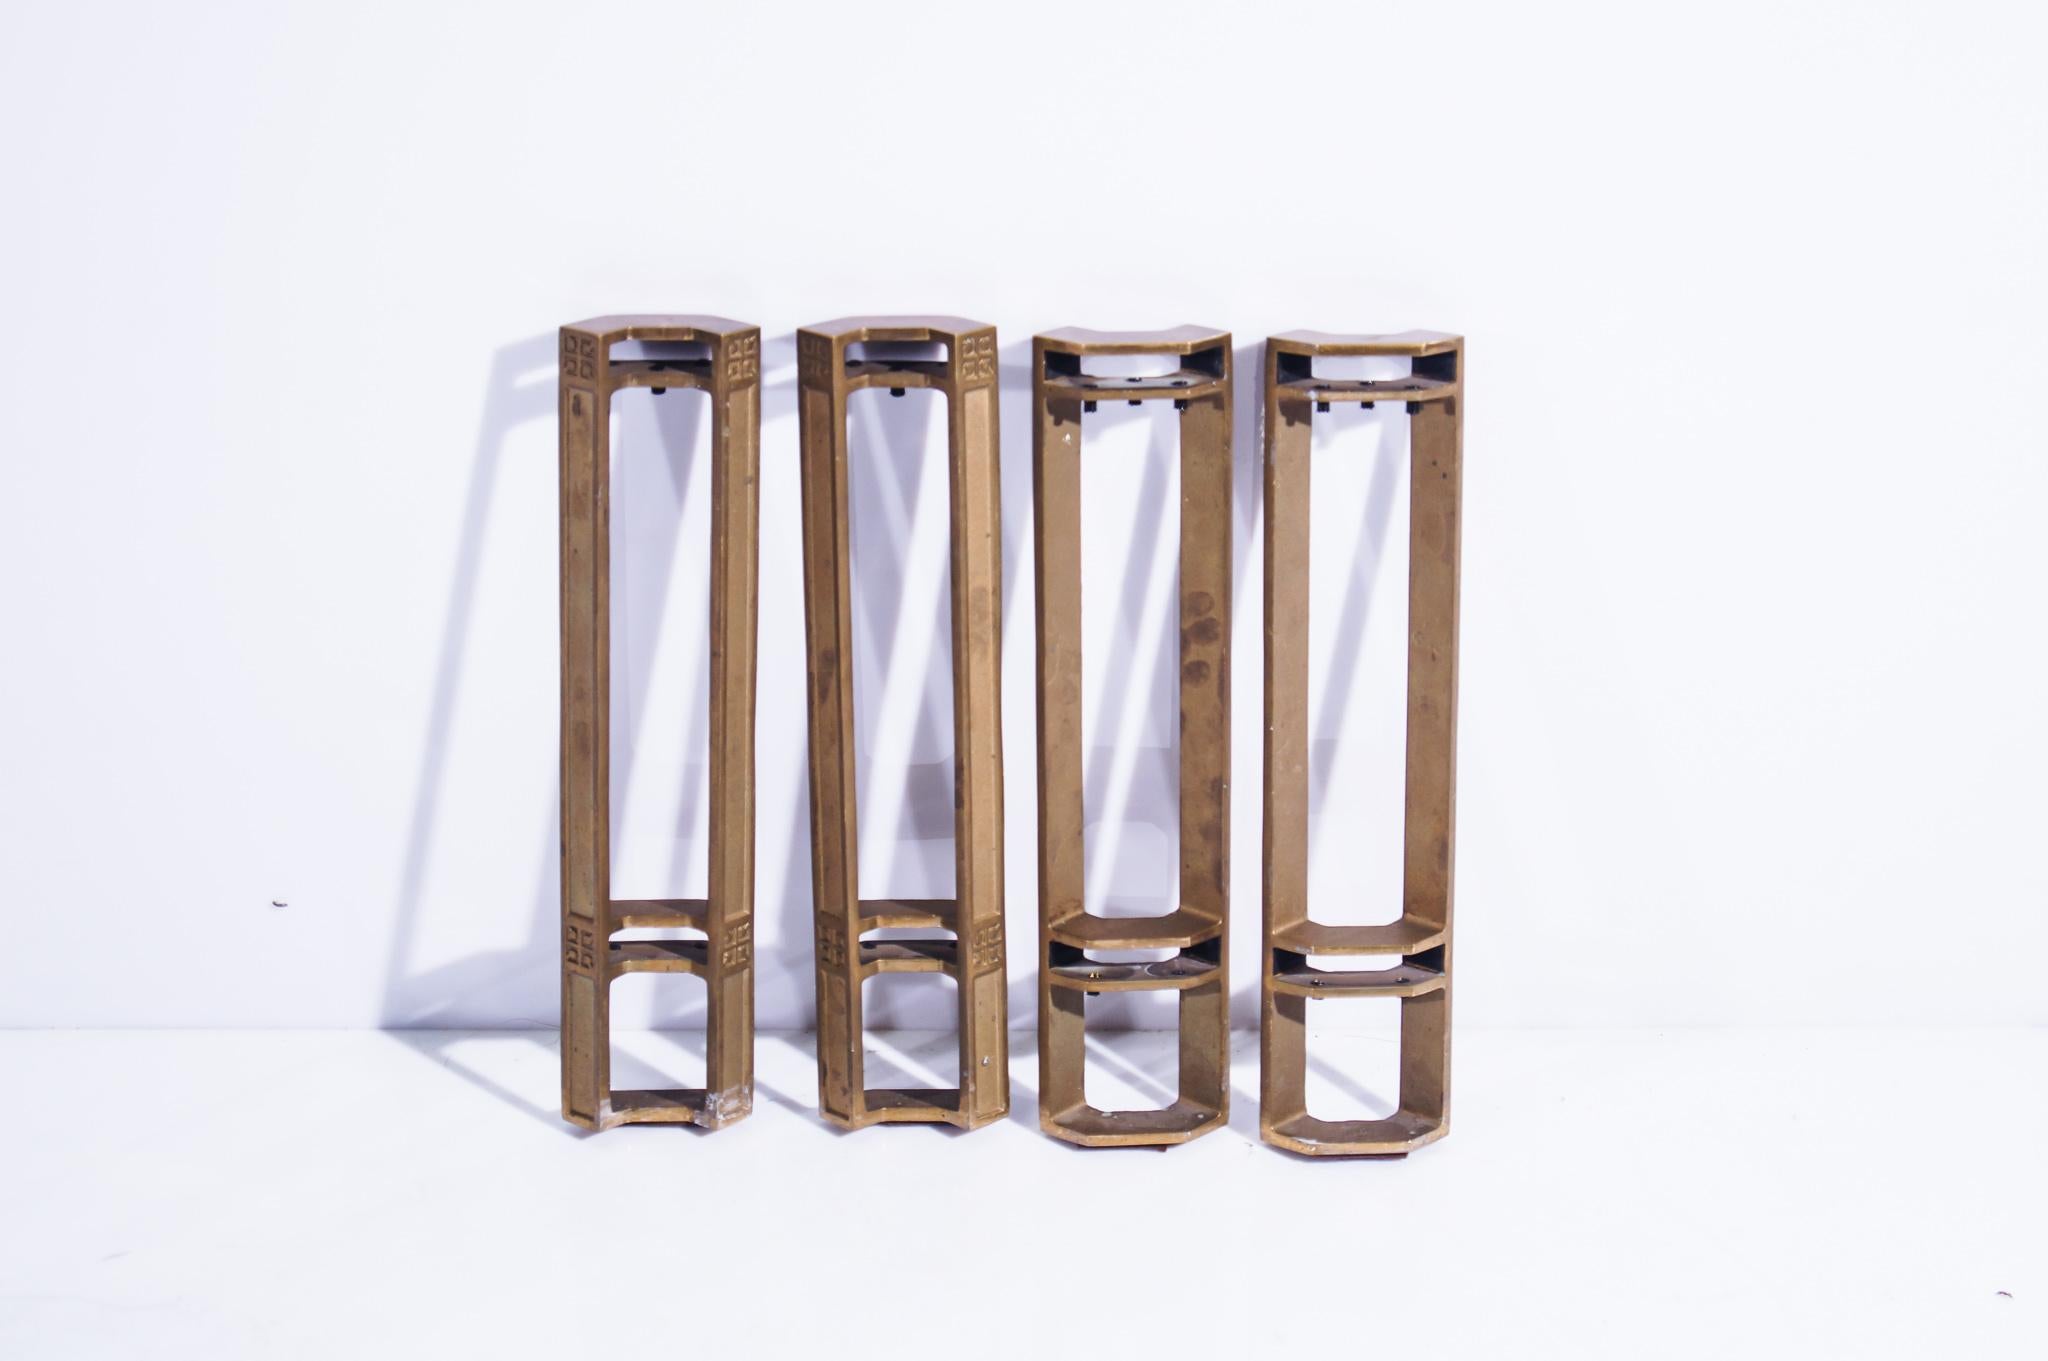 Peter Ghyczhy - Set of 4 Bronze tablelegs
 

Netherlands, 1970's.

Set of 4 cast bronze table legs. Every leg has 2 spaces for glass table top of preference. Glass is cheaper to make in your favorite measurements, than to transport it nowadays.